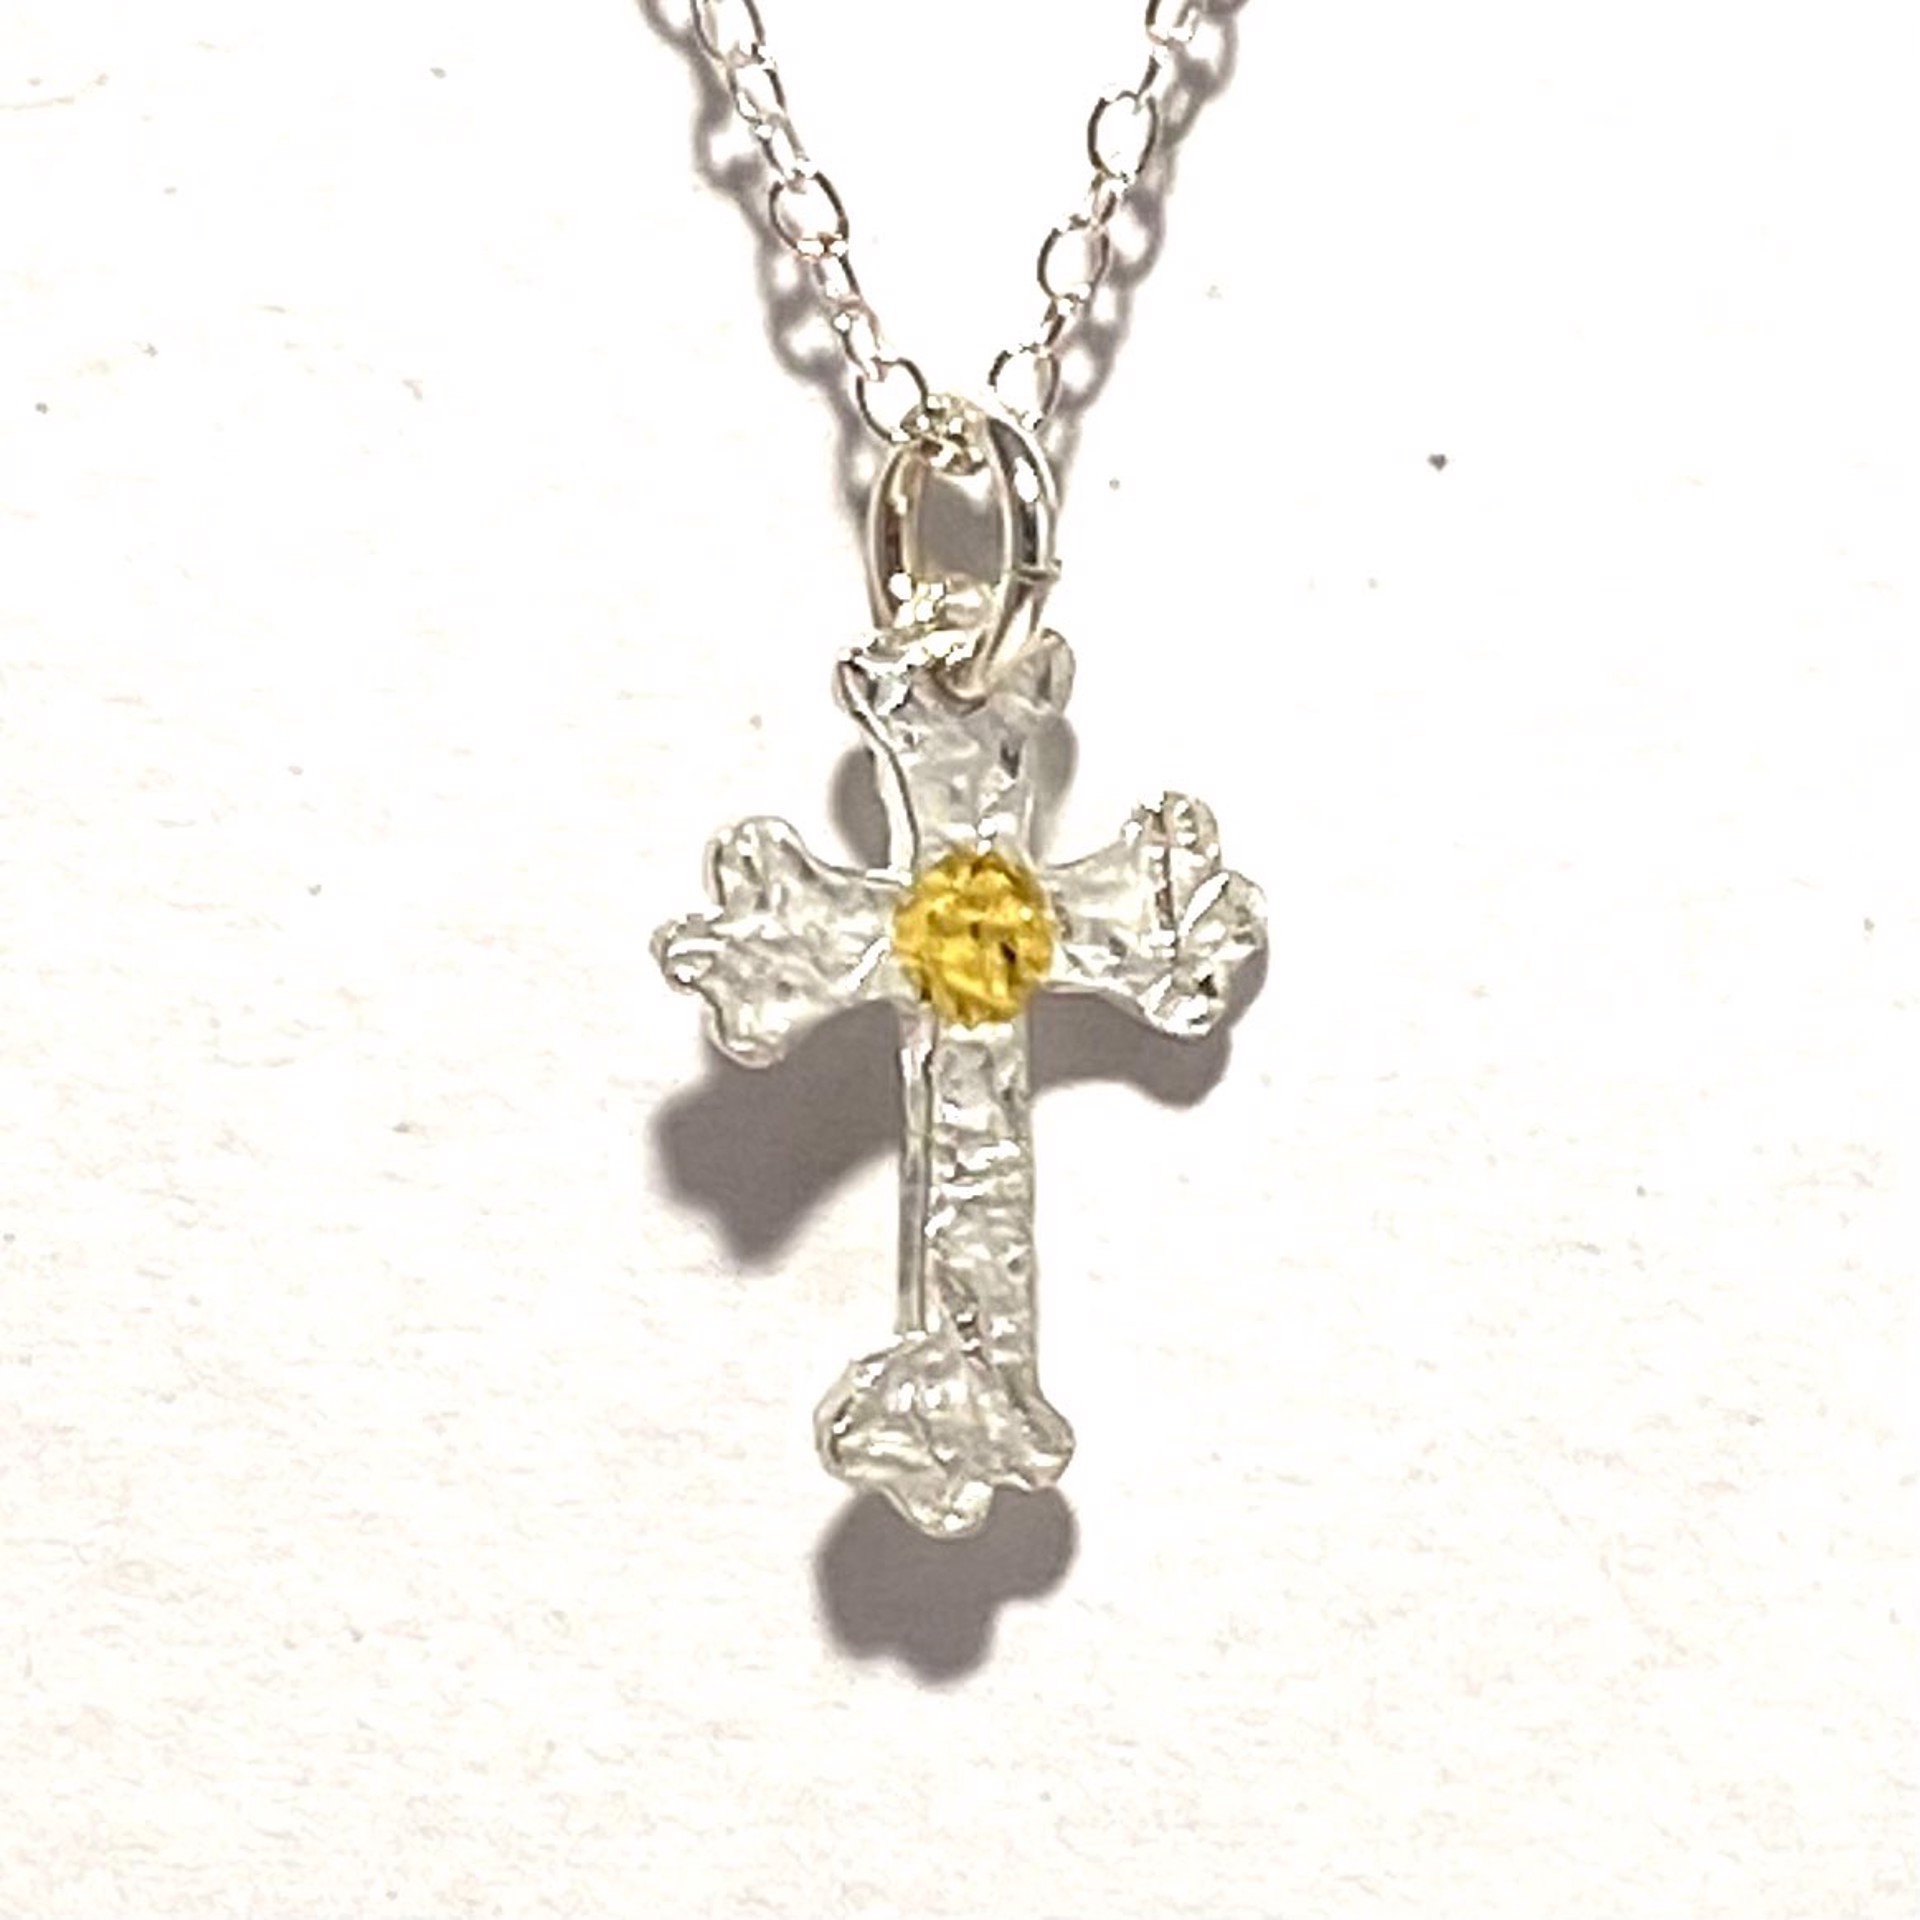 KH22-74 Keum-Boo Fine Silver and Gold Cross Necklace by Karen Hakim